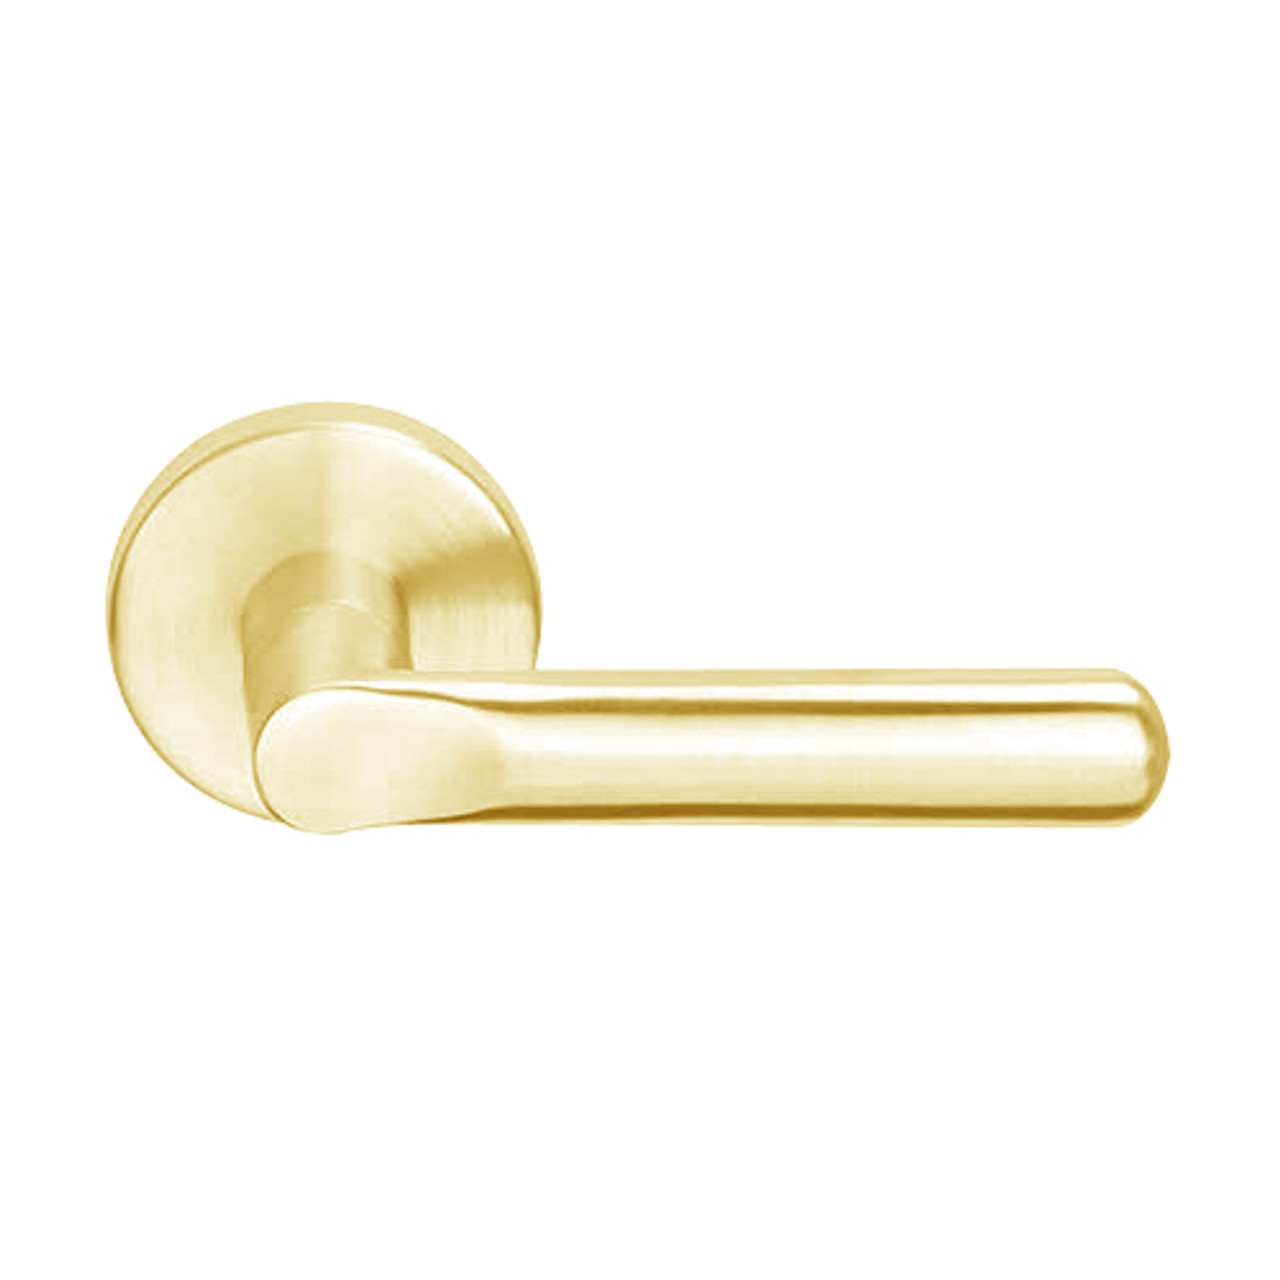 L9050L-18B-605 Schlage L Series Less Cylinder Entrance Commercial Mortise Lock with 18 Cast Lever Design in Bright Brass